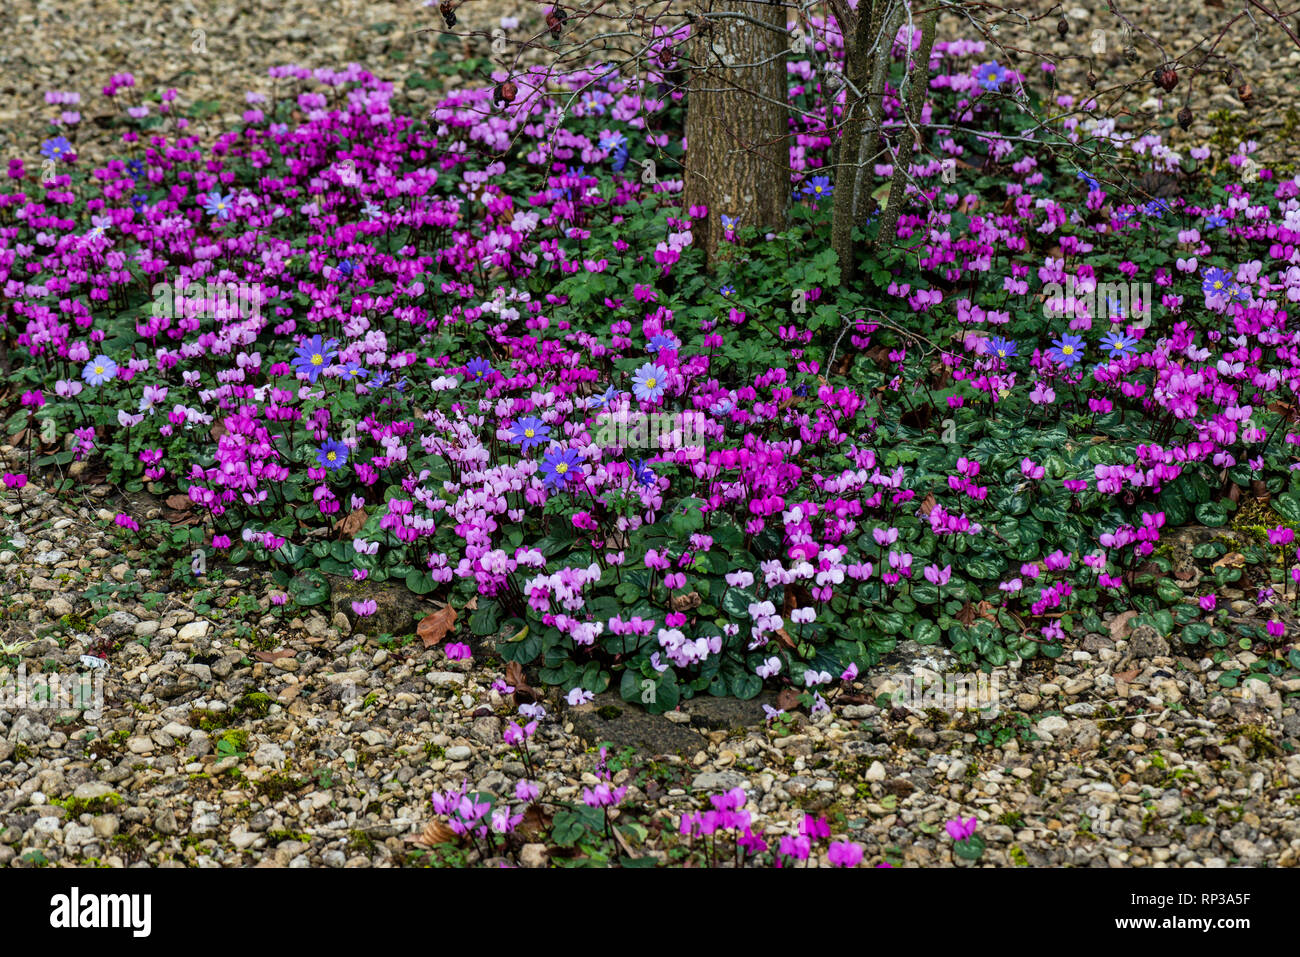 Eastern sowbread (Cyclamen coum) and winter windflower (Anemone blanda) growing around the base of a tree Stock Photo